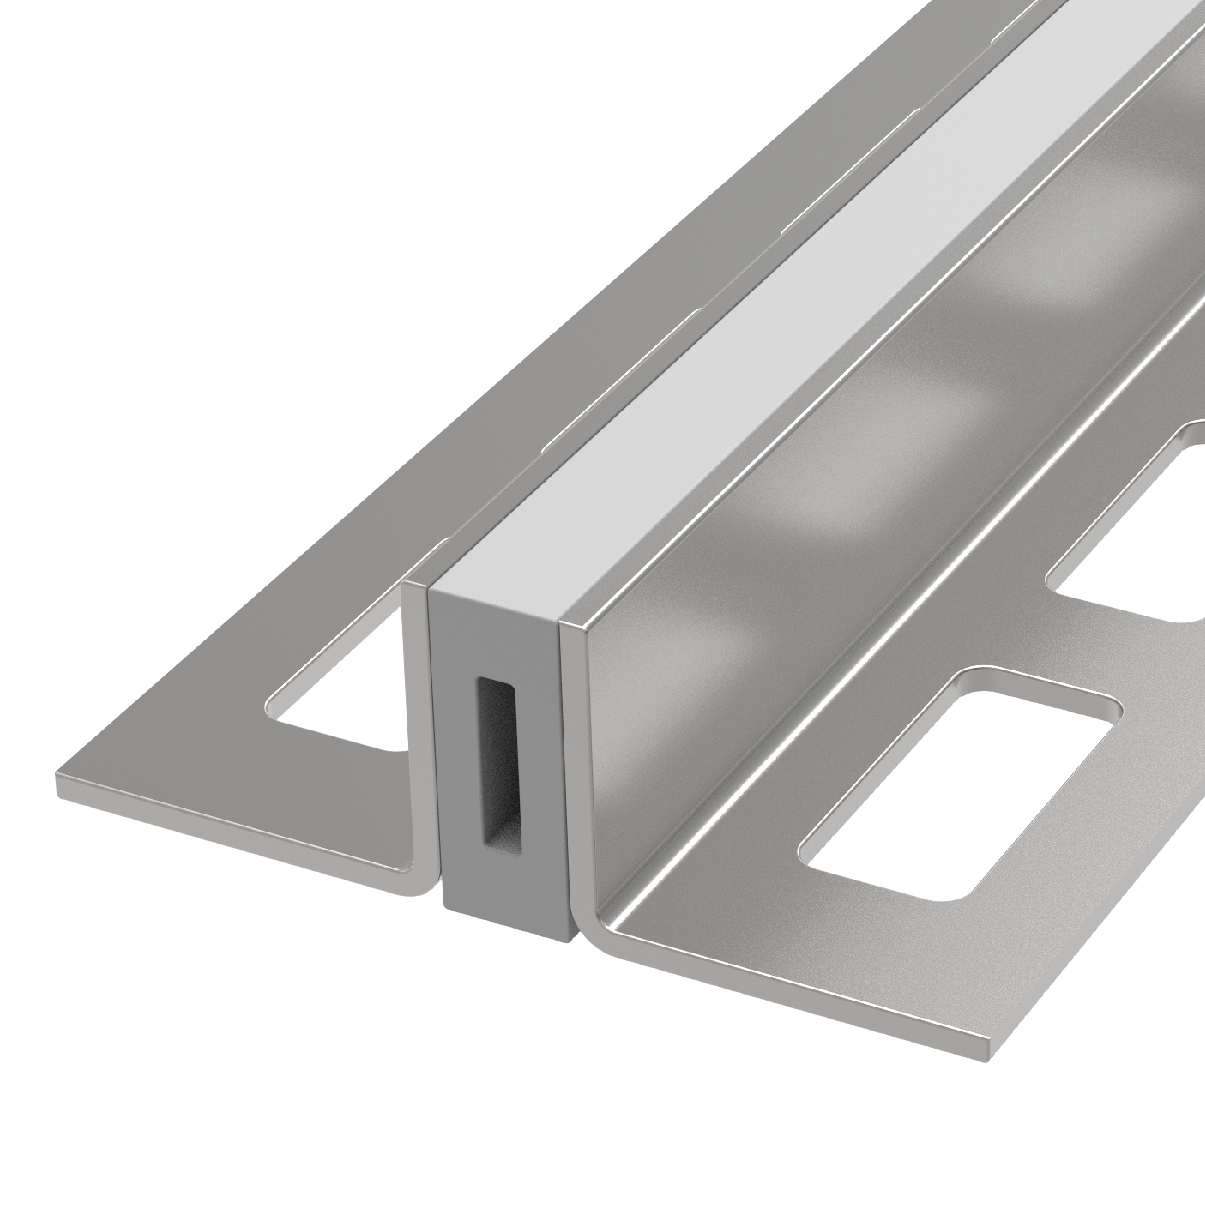 Stainless Steel Movement Joint Profiles for Interiors